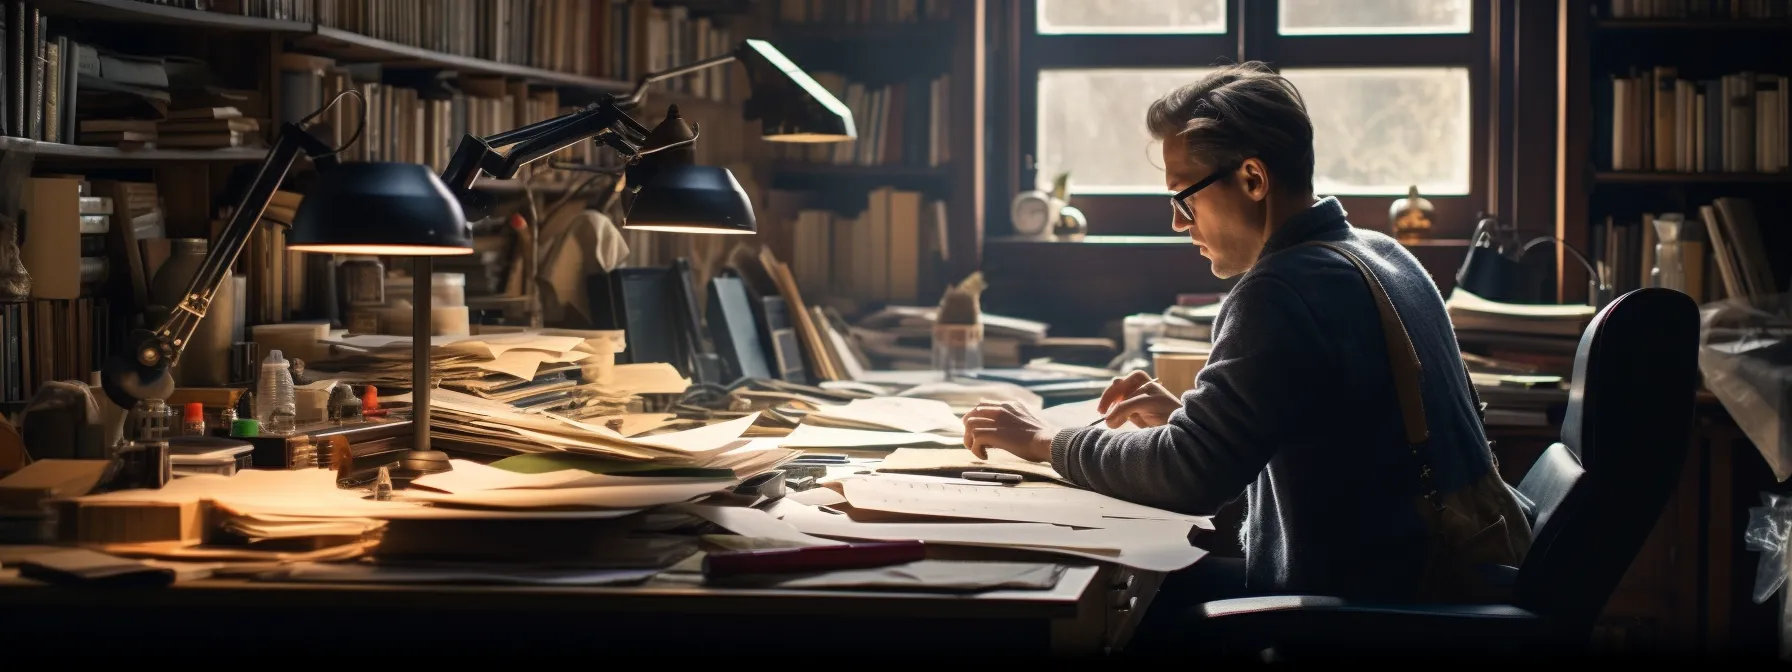 a writer sitting at a desk, surrounded by a collection of books and writing materials, engrossed in crafting captivating sentences using diverse keyphrases.